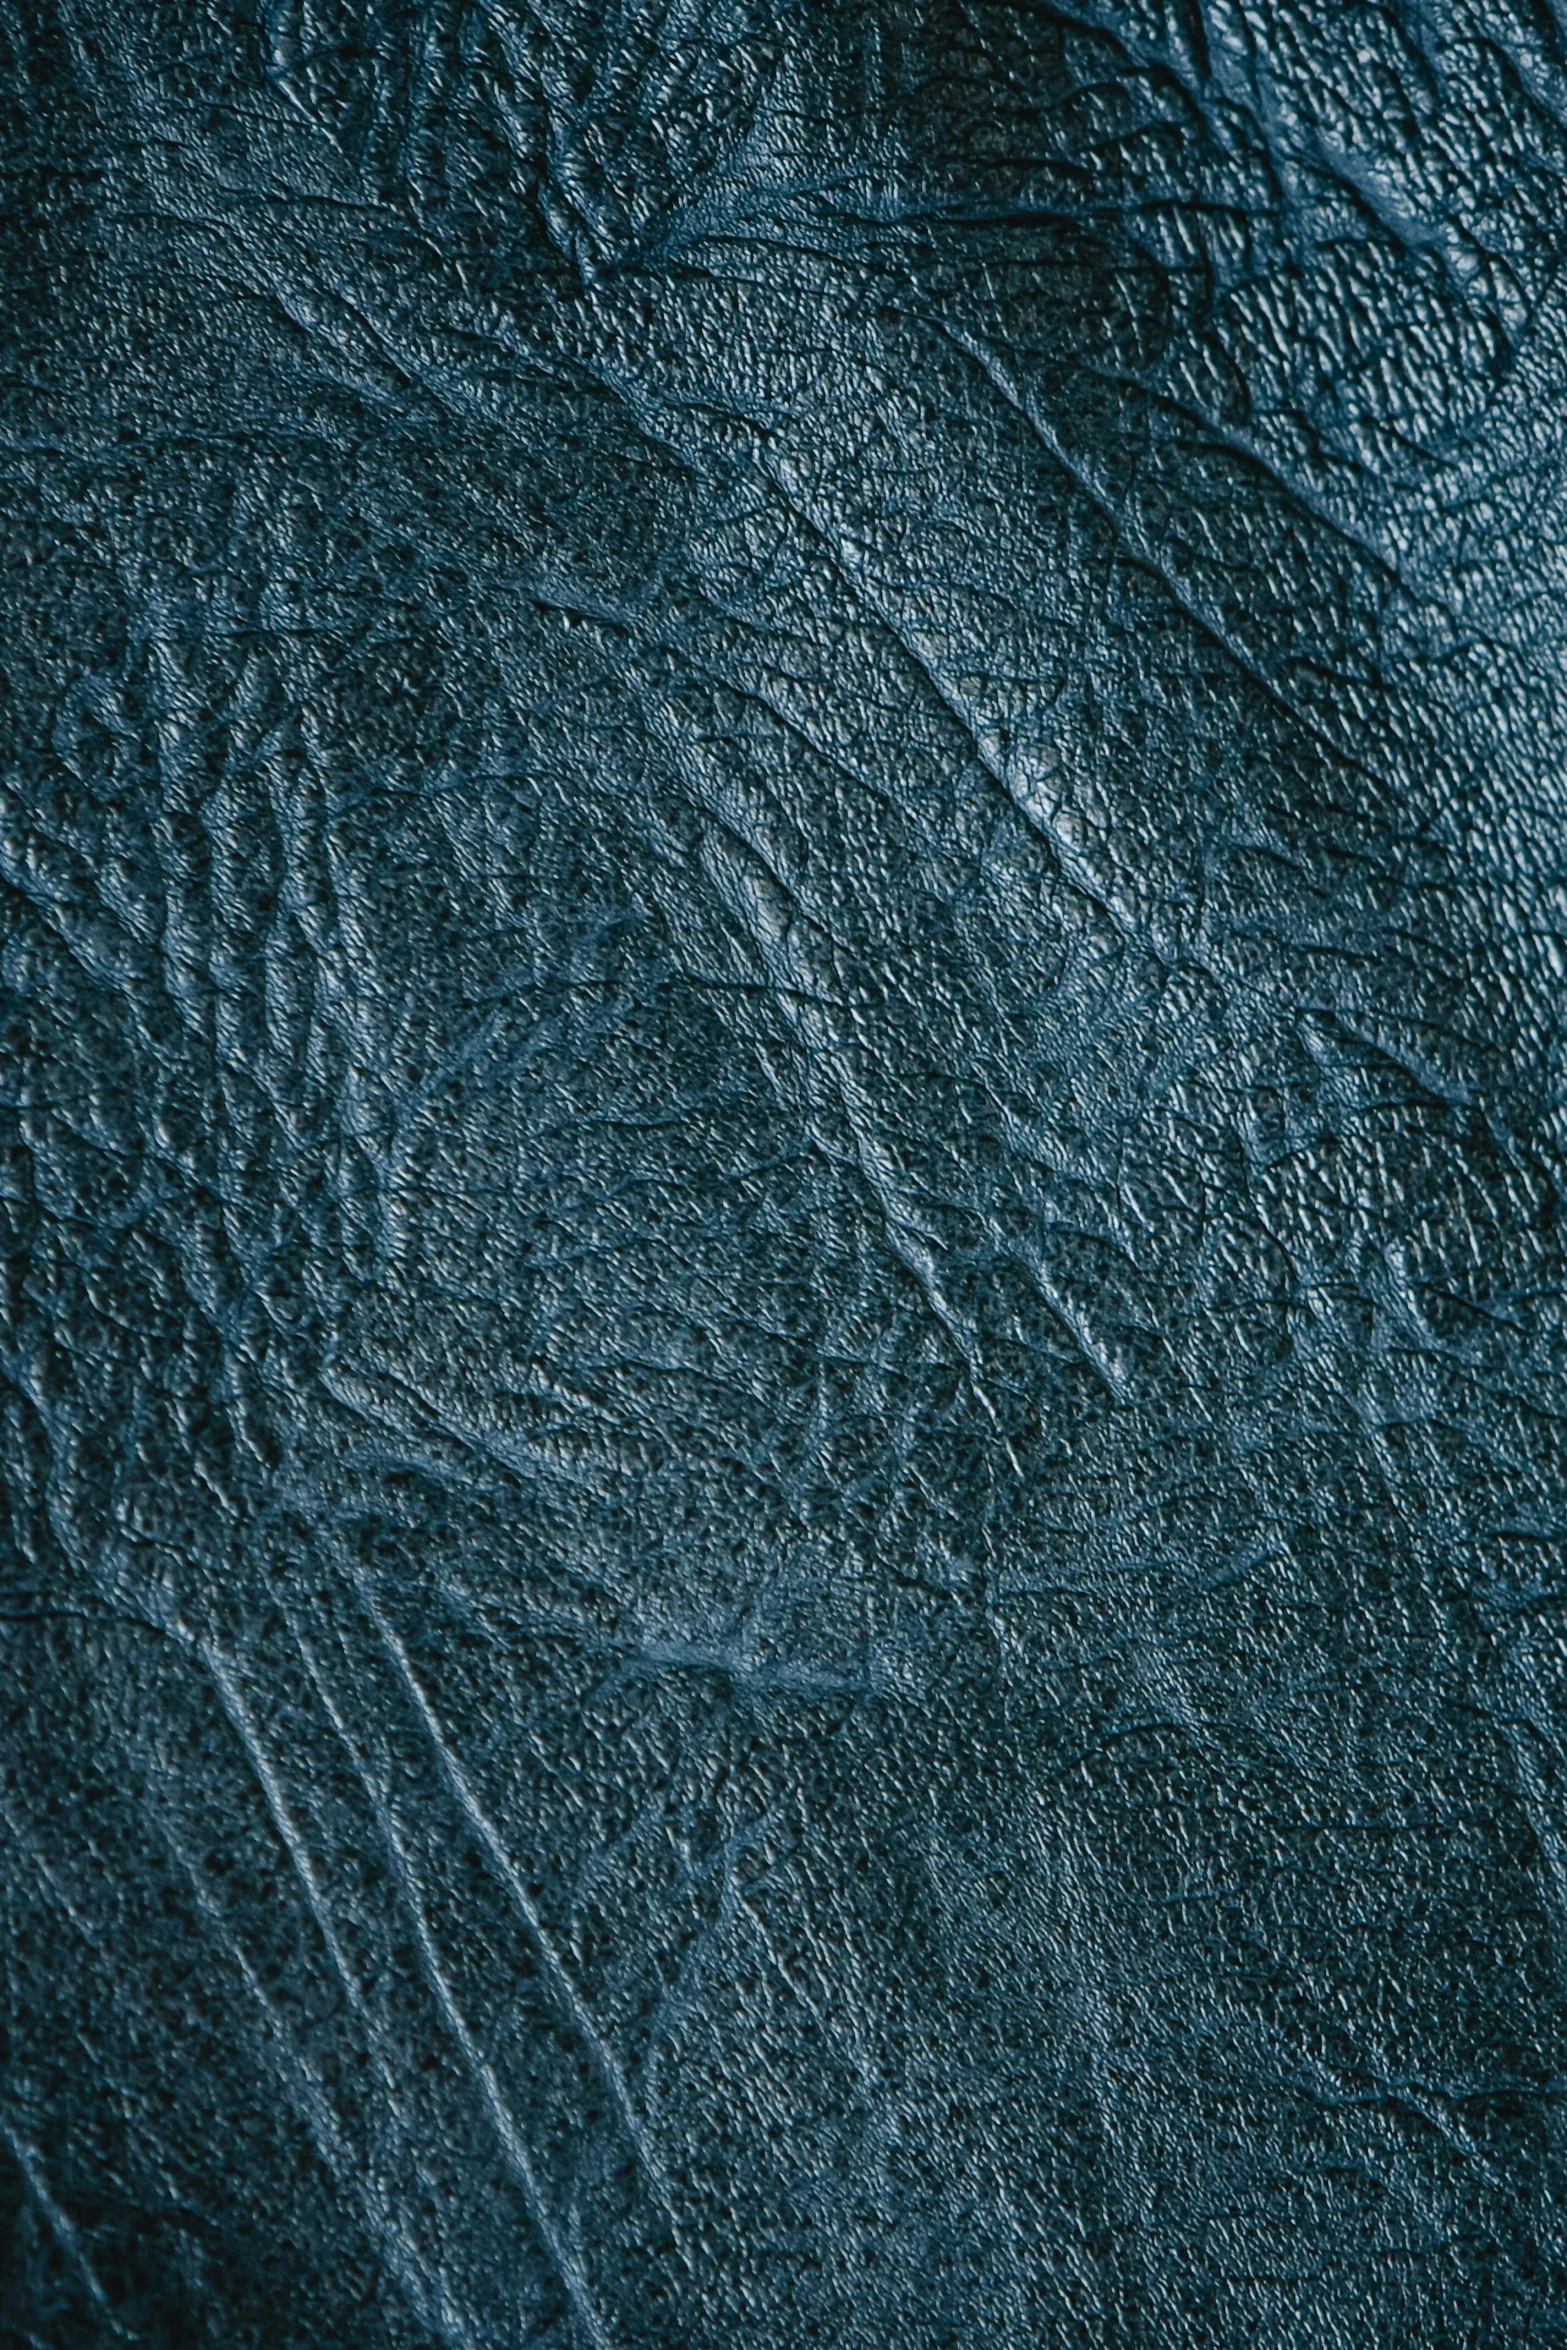 a close up of a blue leather surface, an album cover, by Adam Marczyński, trending on unsplash, renaissance, wrinkled skin, detailed product image, anthracite, jelly - like texture